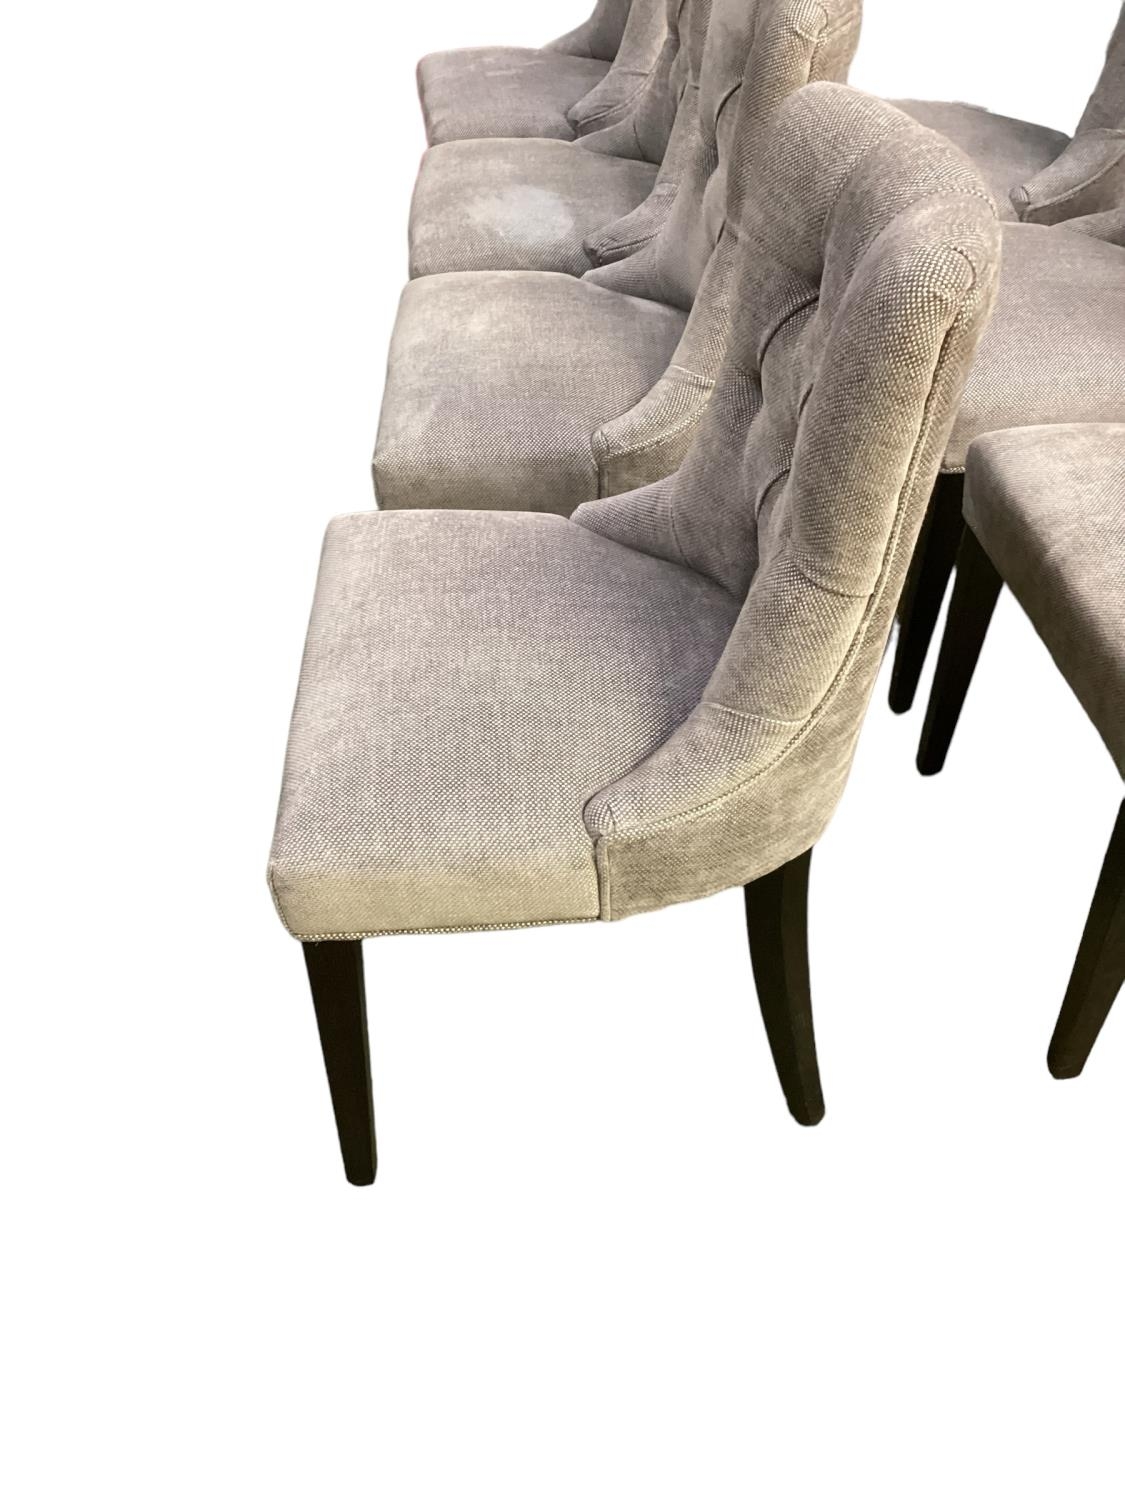 A set of good 12 bespoke made contemporary dining chairs, upholstered and button backed in a quality - Image 3 of 3